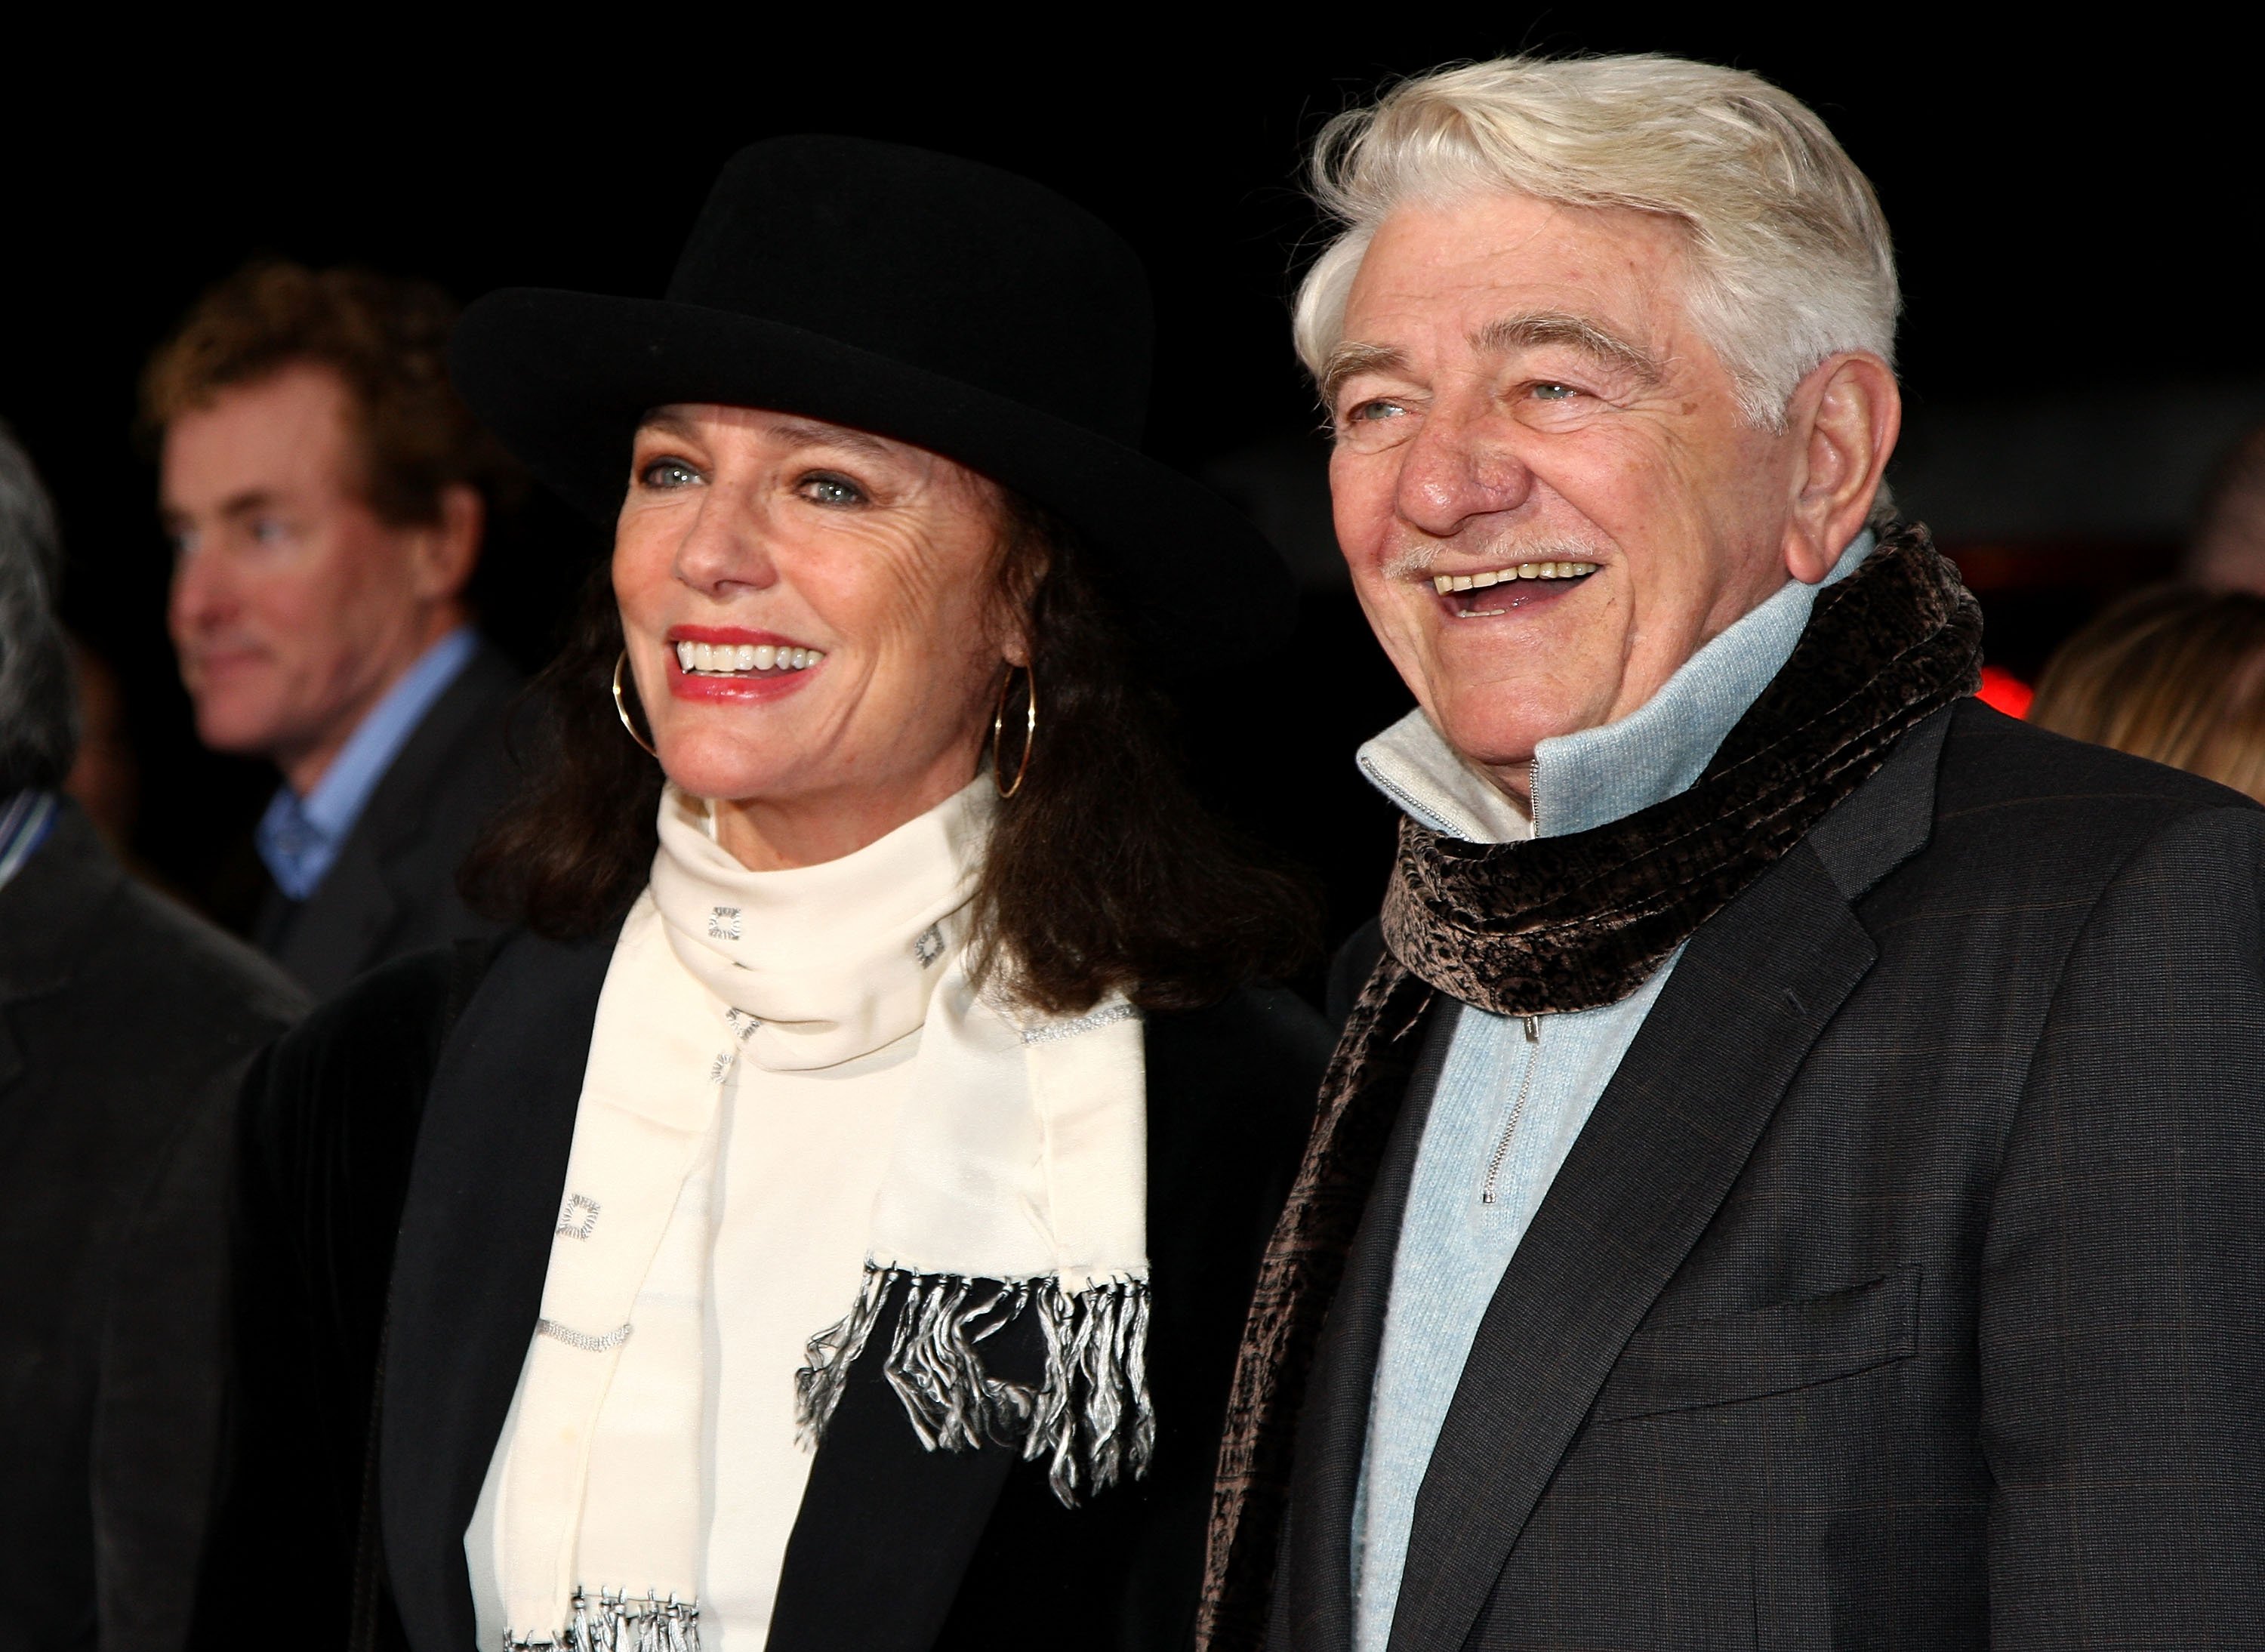 Jacqueline Bisset and Seymour Cassel arrive at Paramount Vantage's Los Angeles premiere of 'Revolutionary Road' on December 15, 2008 in Westwood, California. Photo: Getty Images/GlobalImagesUkraine